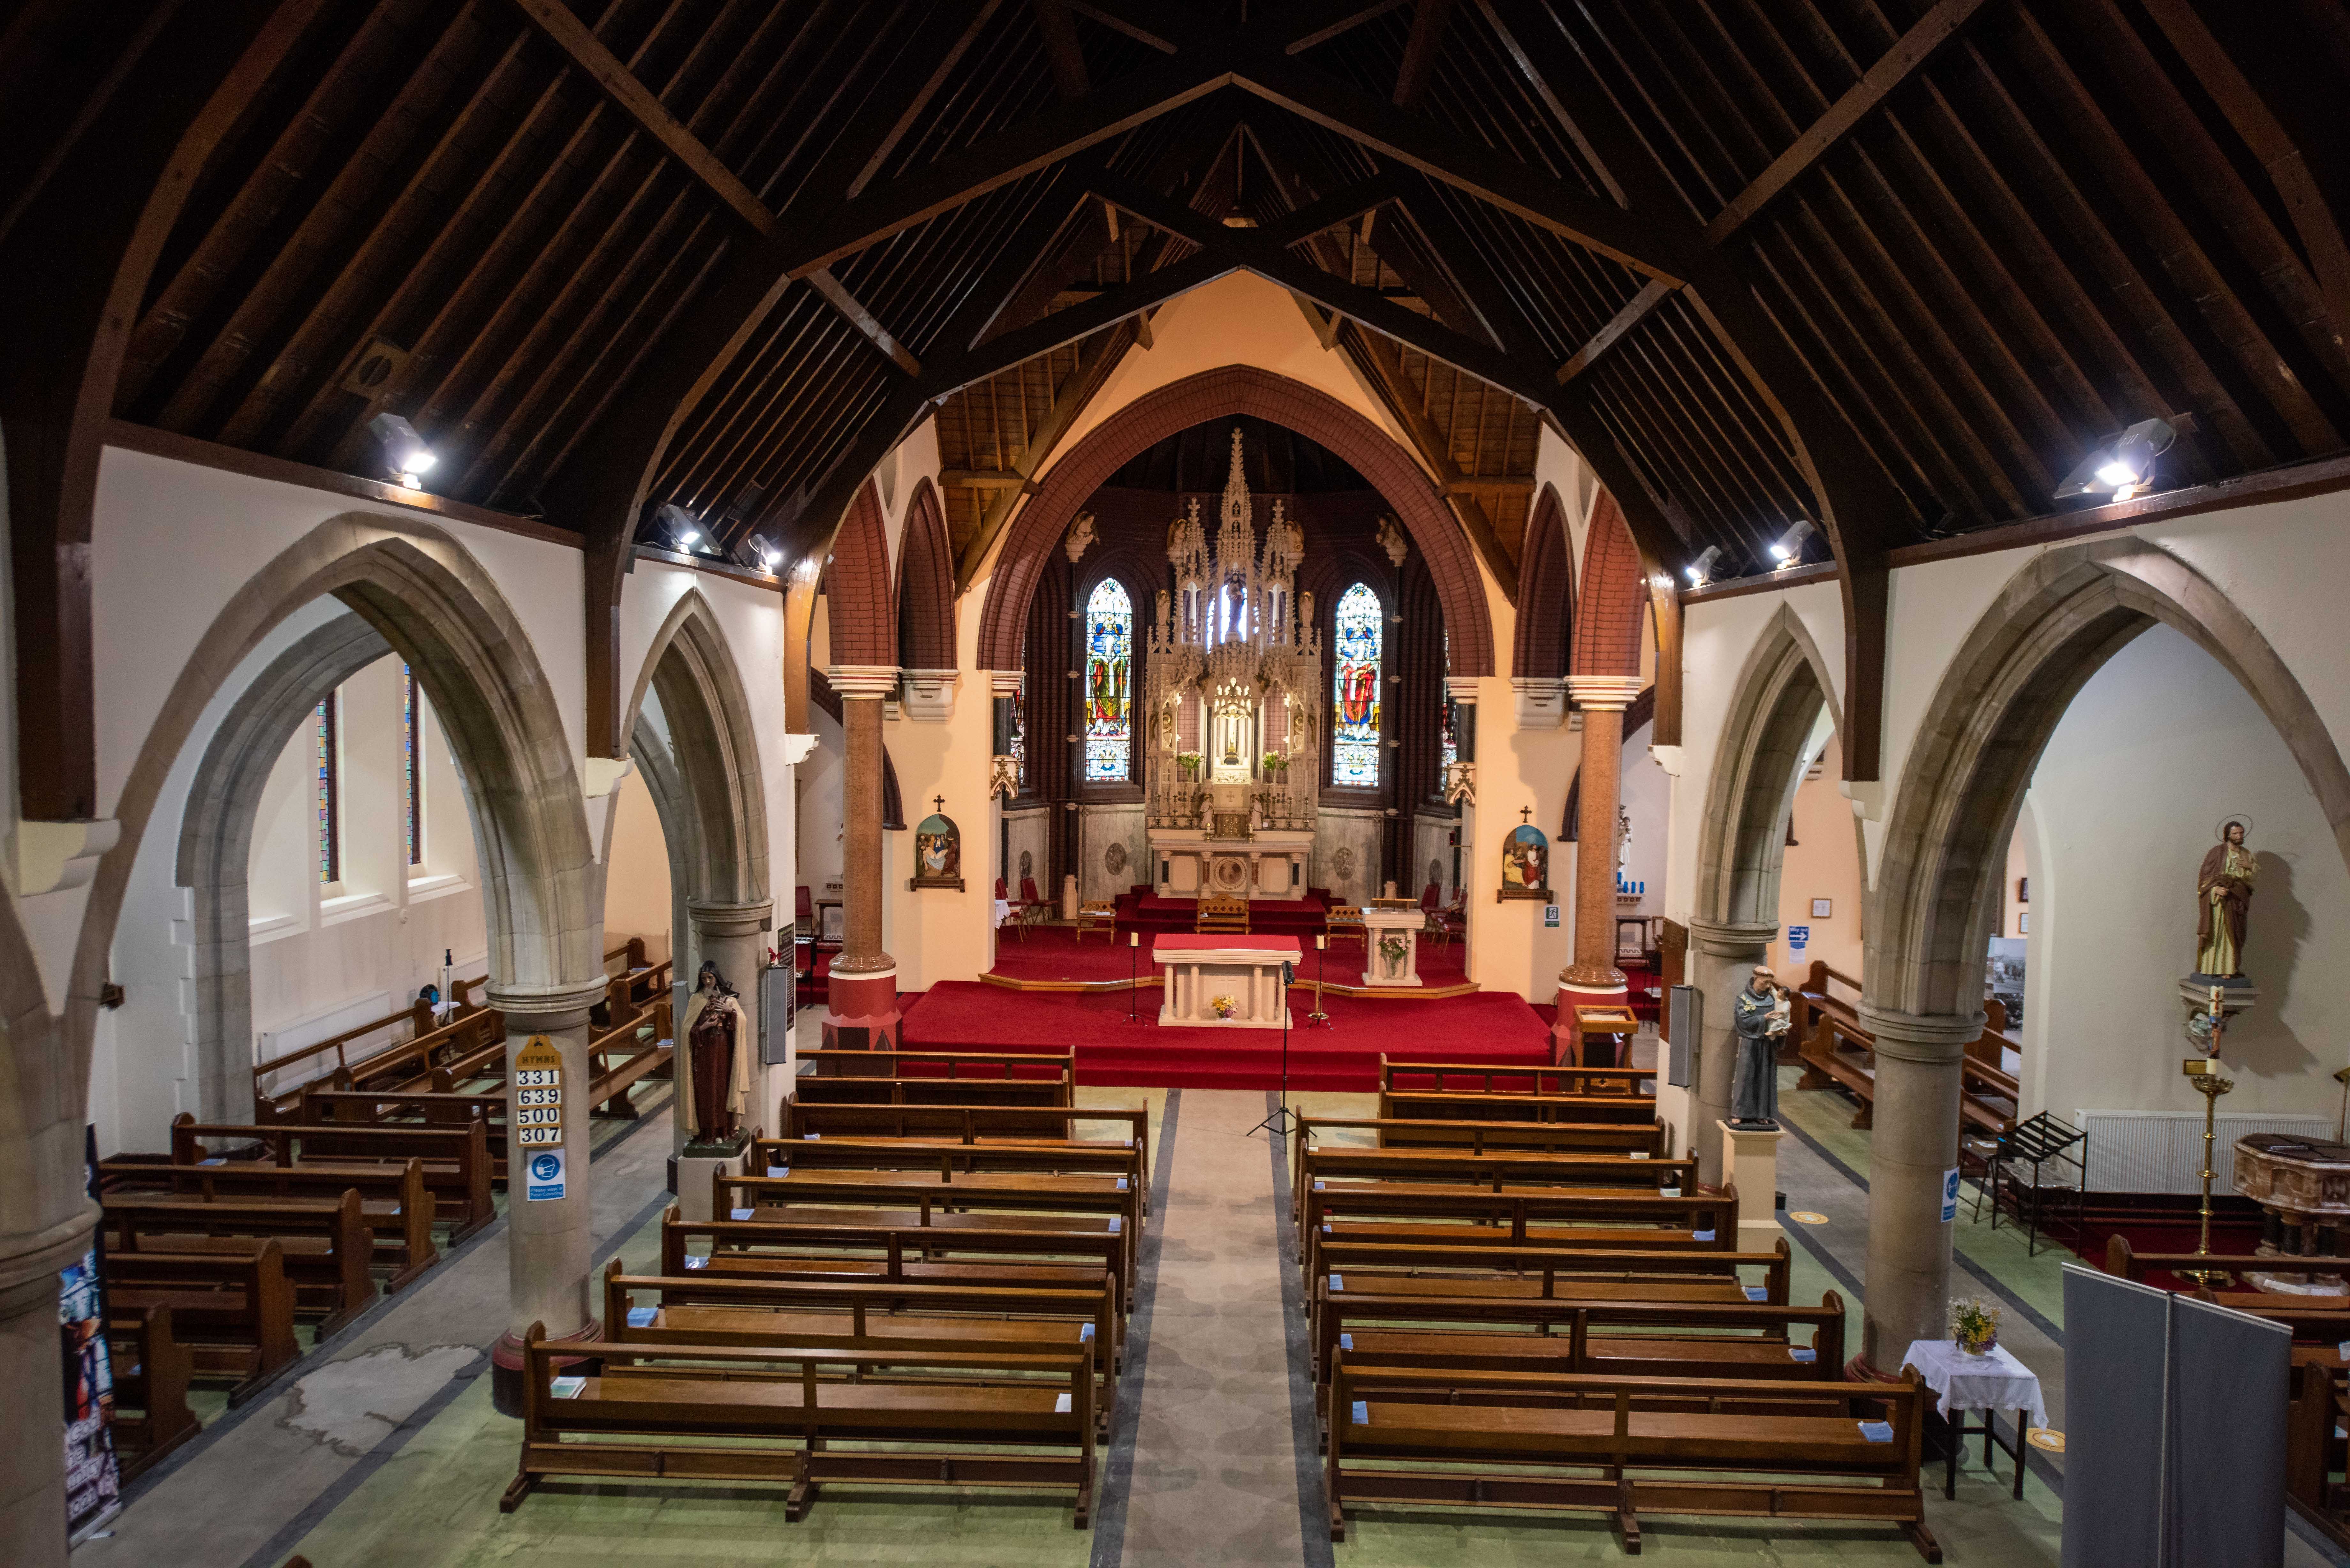 First post-Reformation Catholic church in Welsh valleys saved from closure 